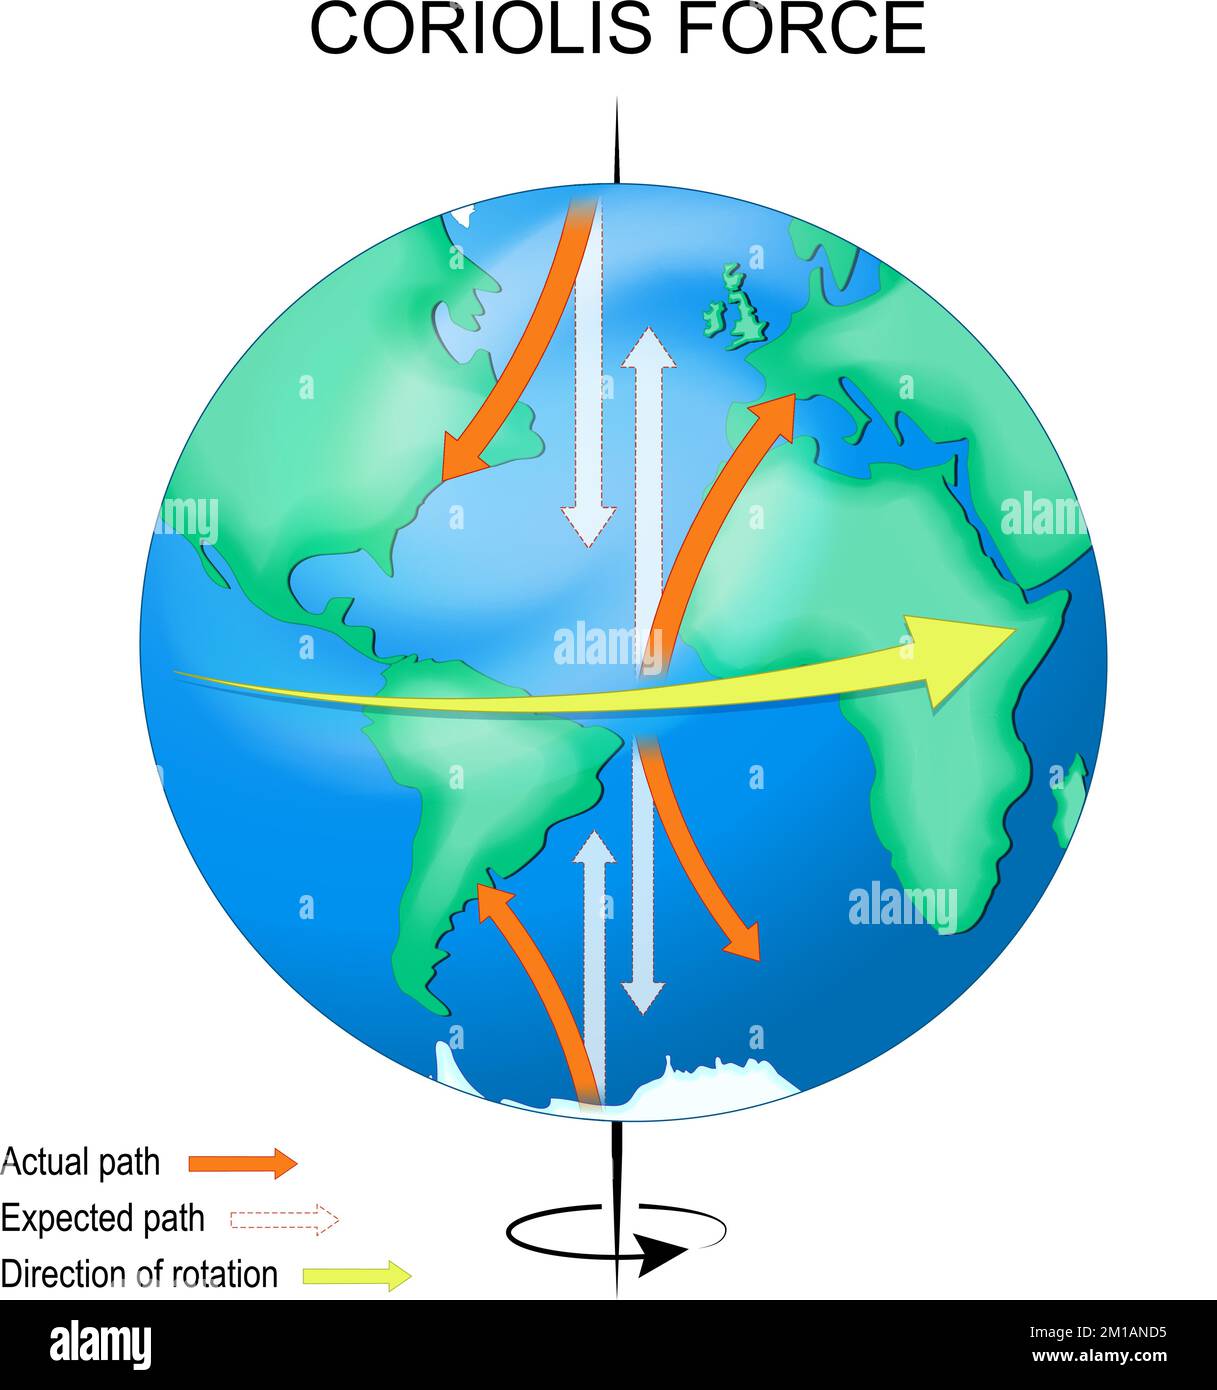 Coriolis effect. Earth with continents, equator, axis and arrows that